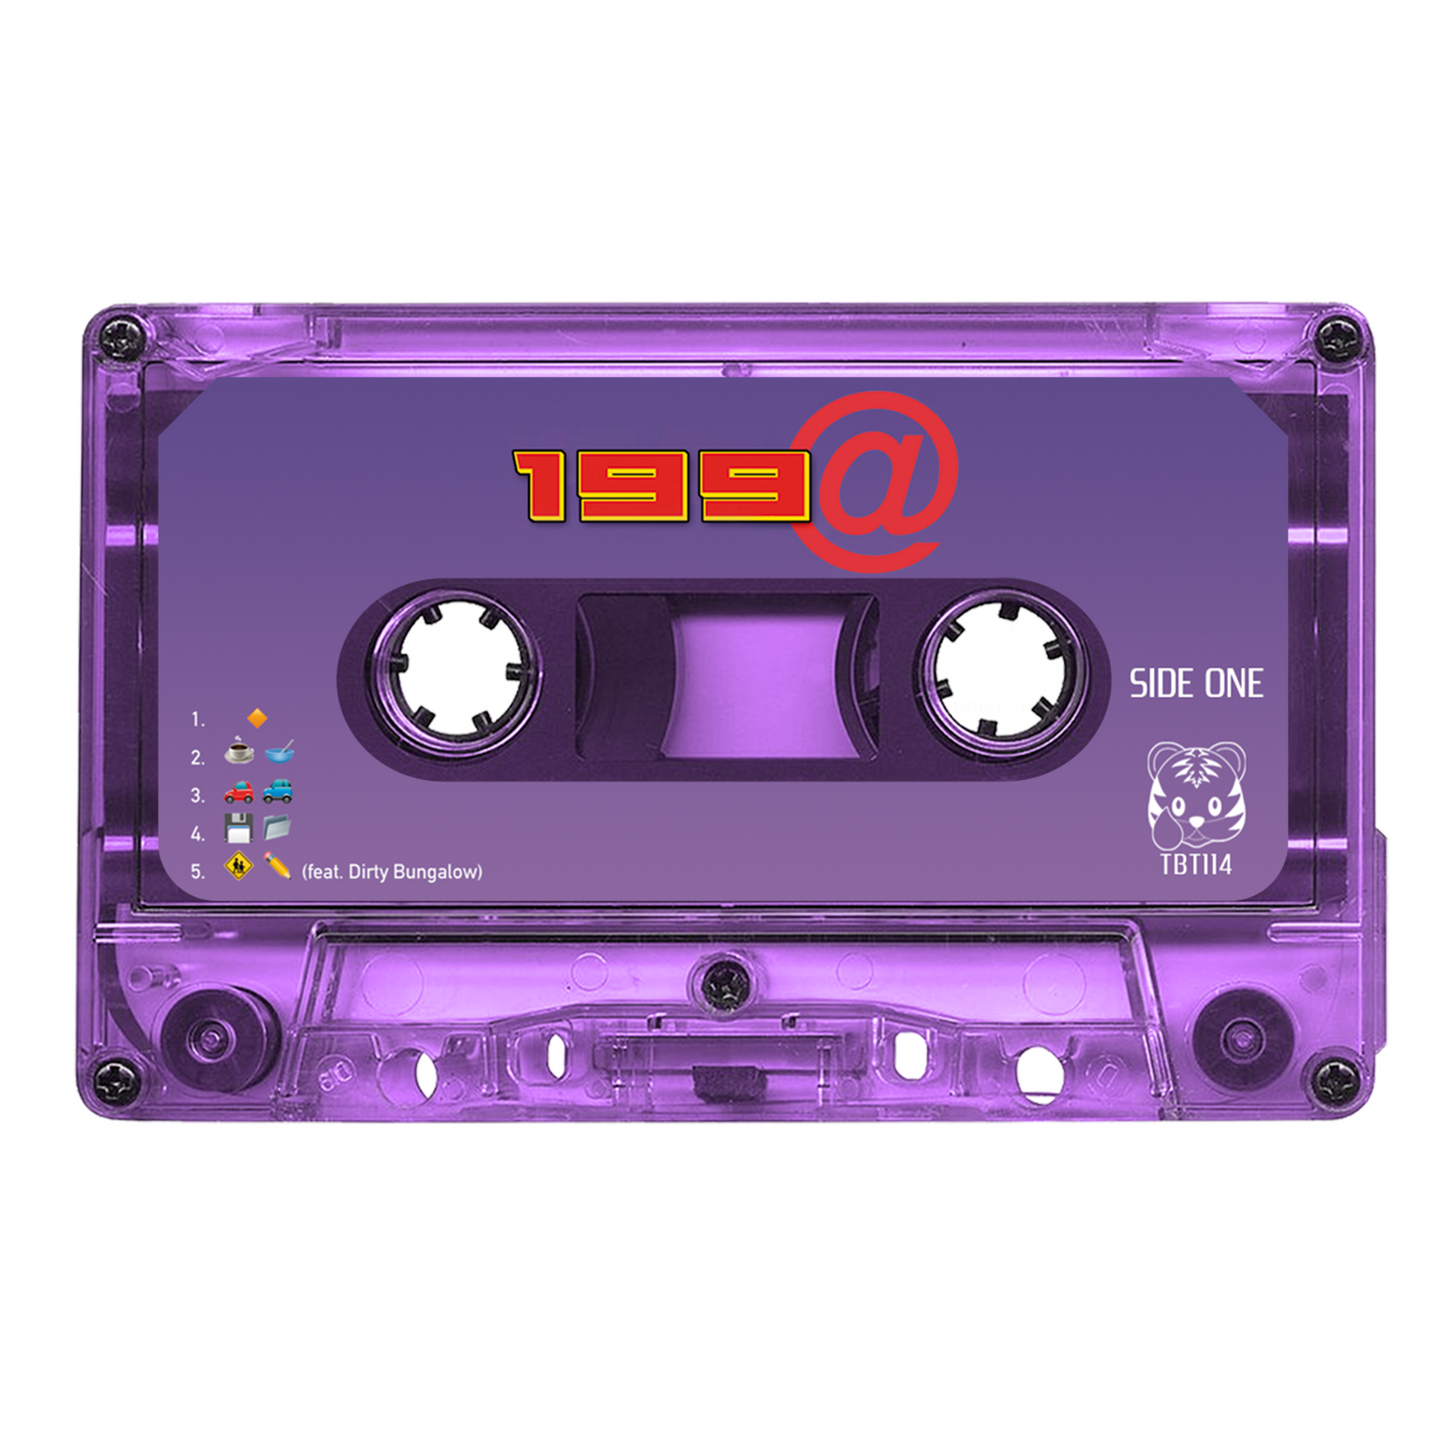 MWG - "199@" Limited Edition Cassette Tape